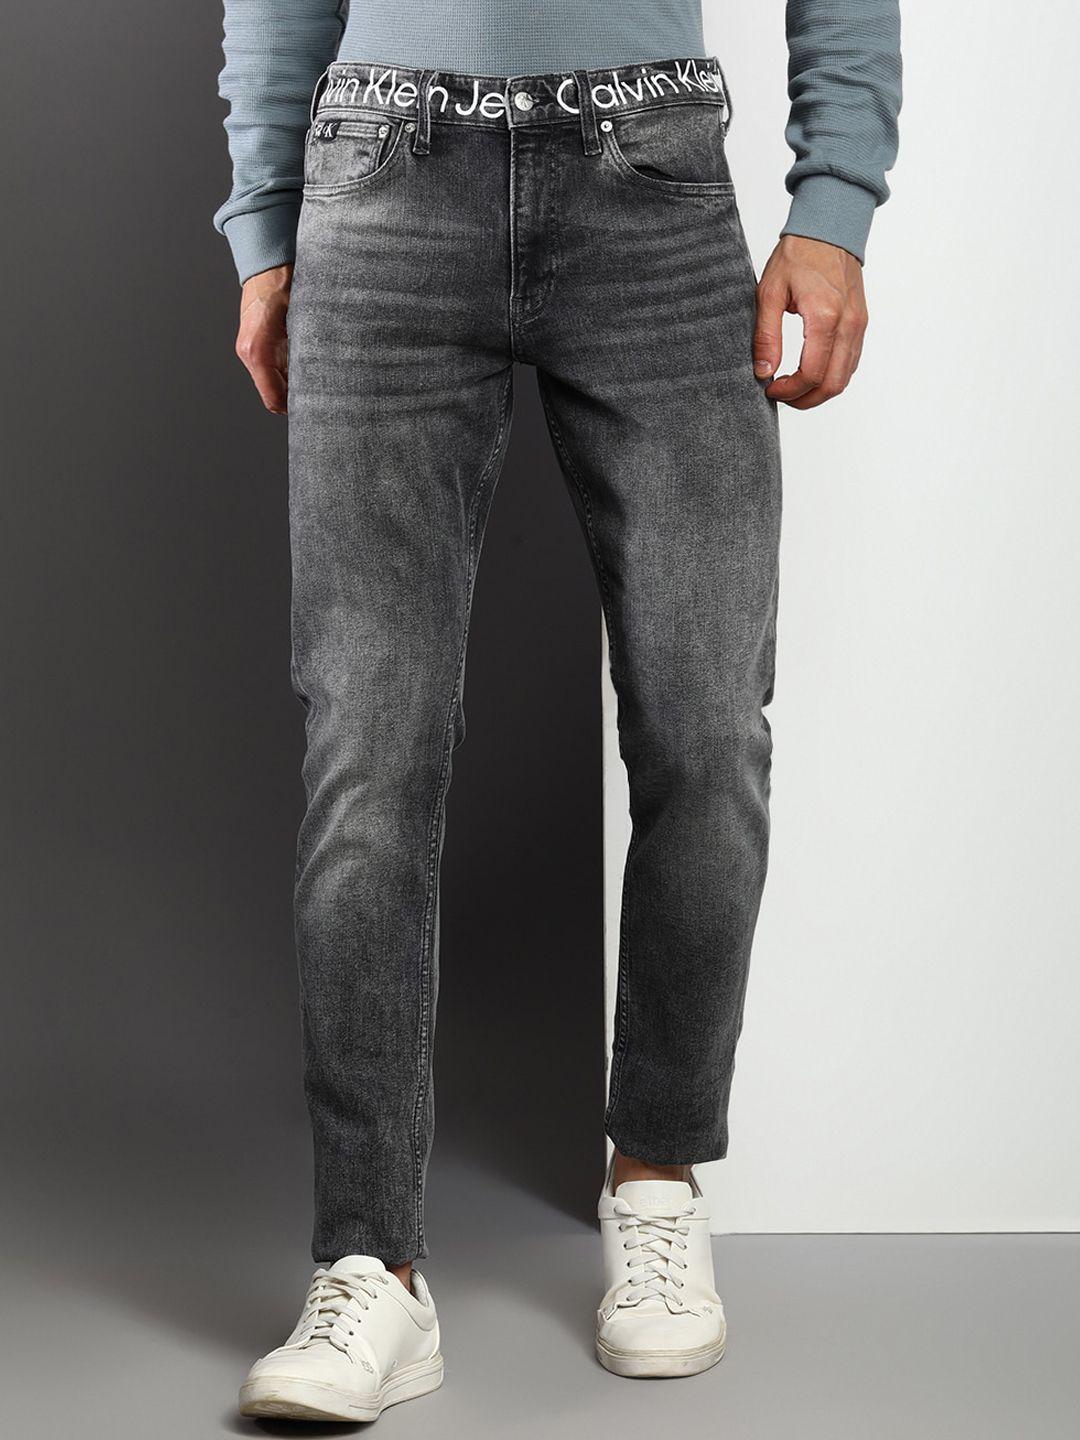 calvin-klein-jeans-men-tapered-fit-heavy-fade-cotton-jeans